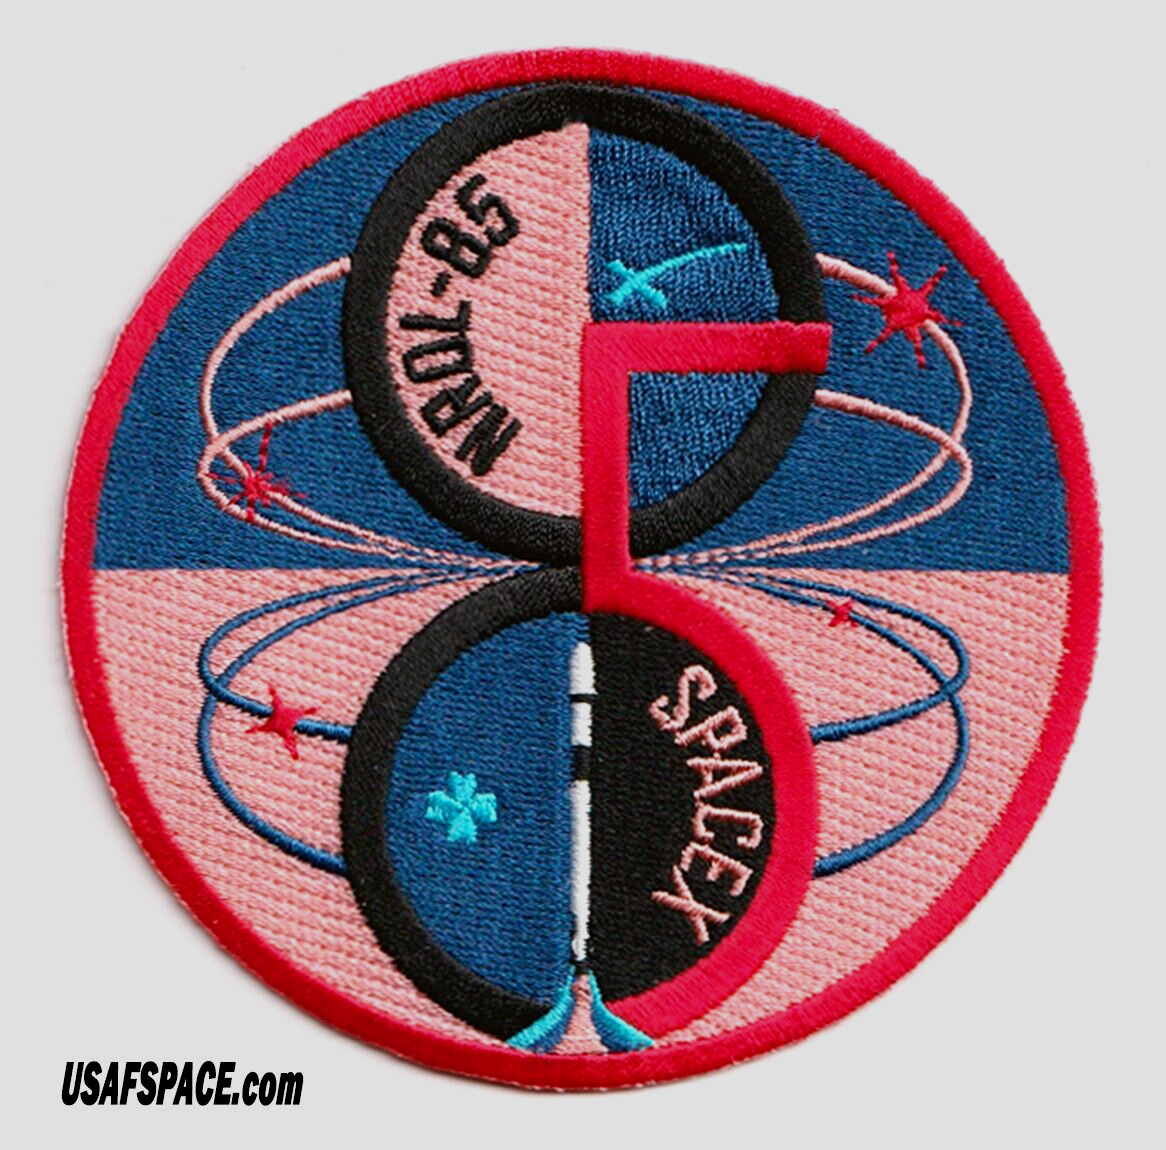 Authentic NROL-85 SPACEX FALCON HEAVY DOD NRO Classified Mission Employee PATCH